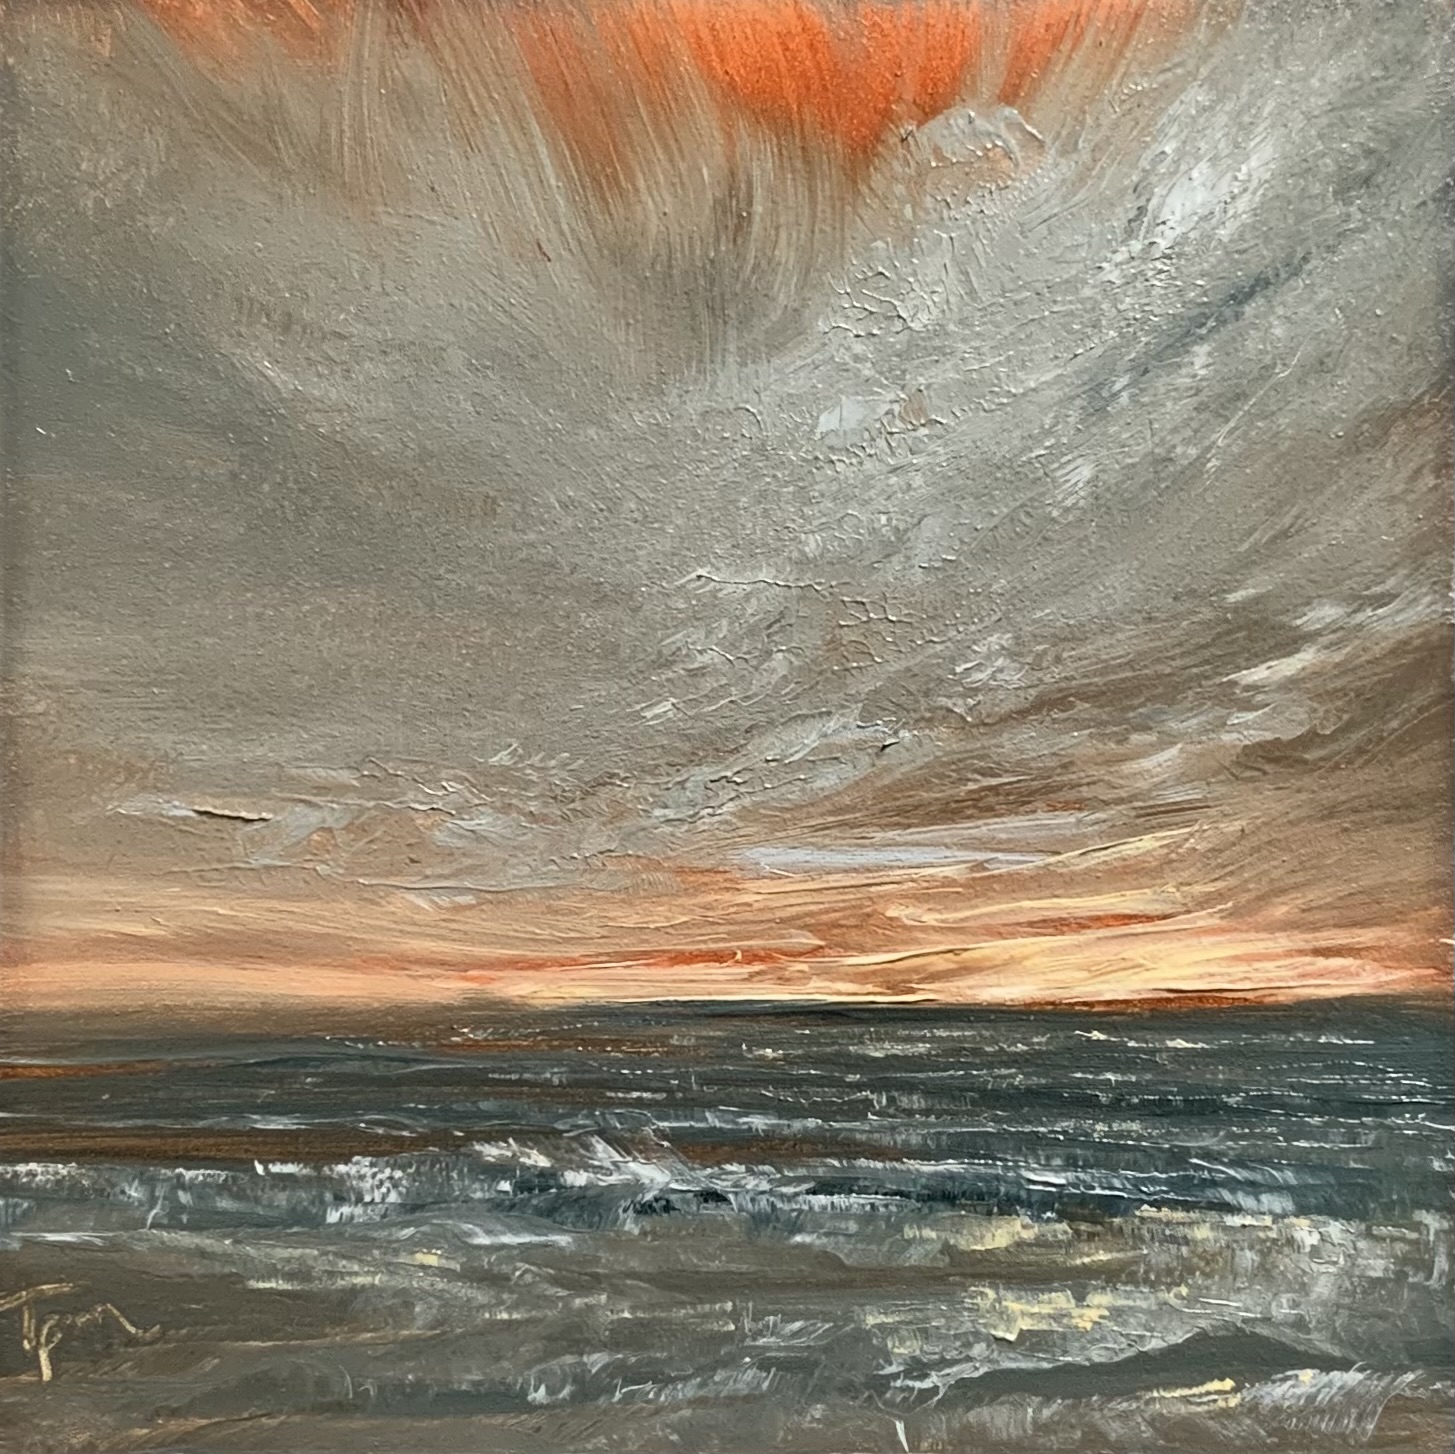 Original oil painting by Tisha Mark, Week 2, 52 Weeks of Finding Light, 4"x4" oil on Gessobord (2023). Painting shows an orange-toned sunrise sky with storm clouds over a choppy sea.